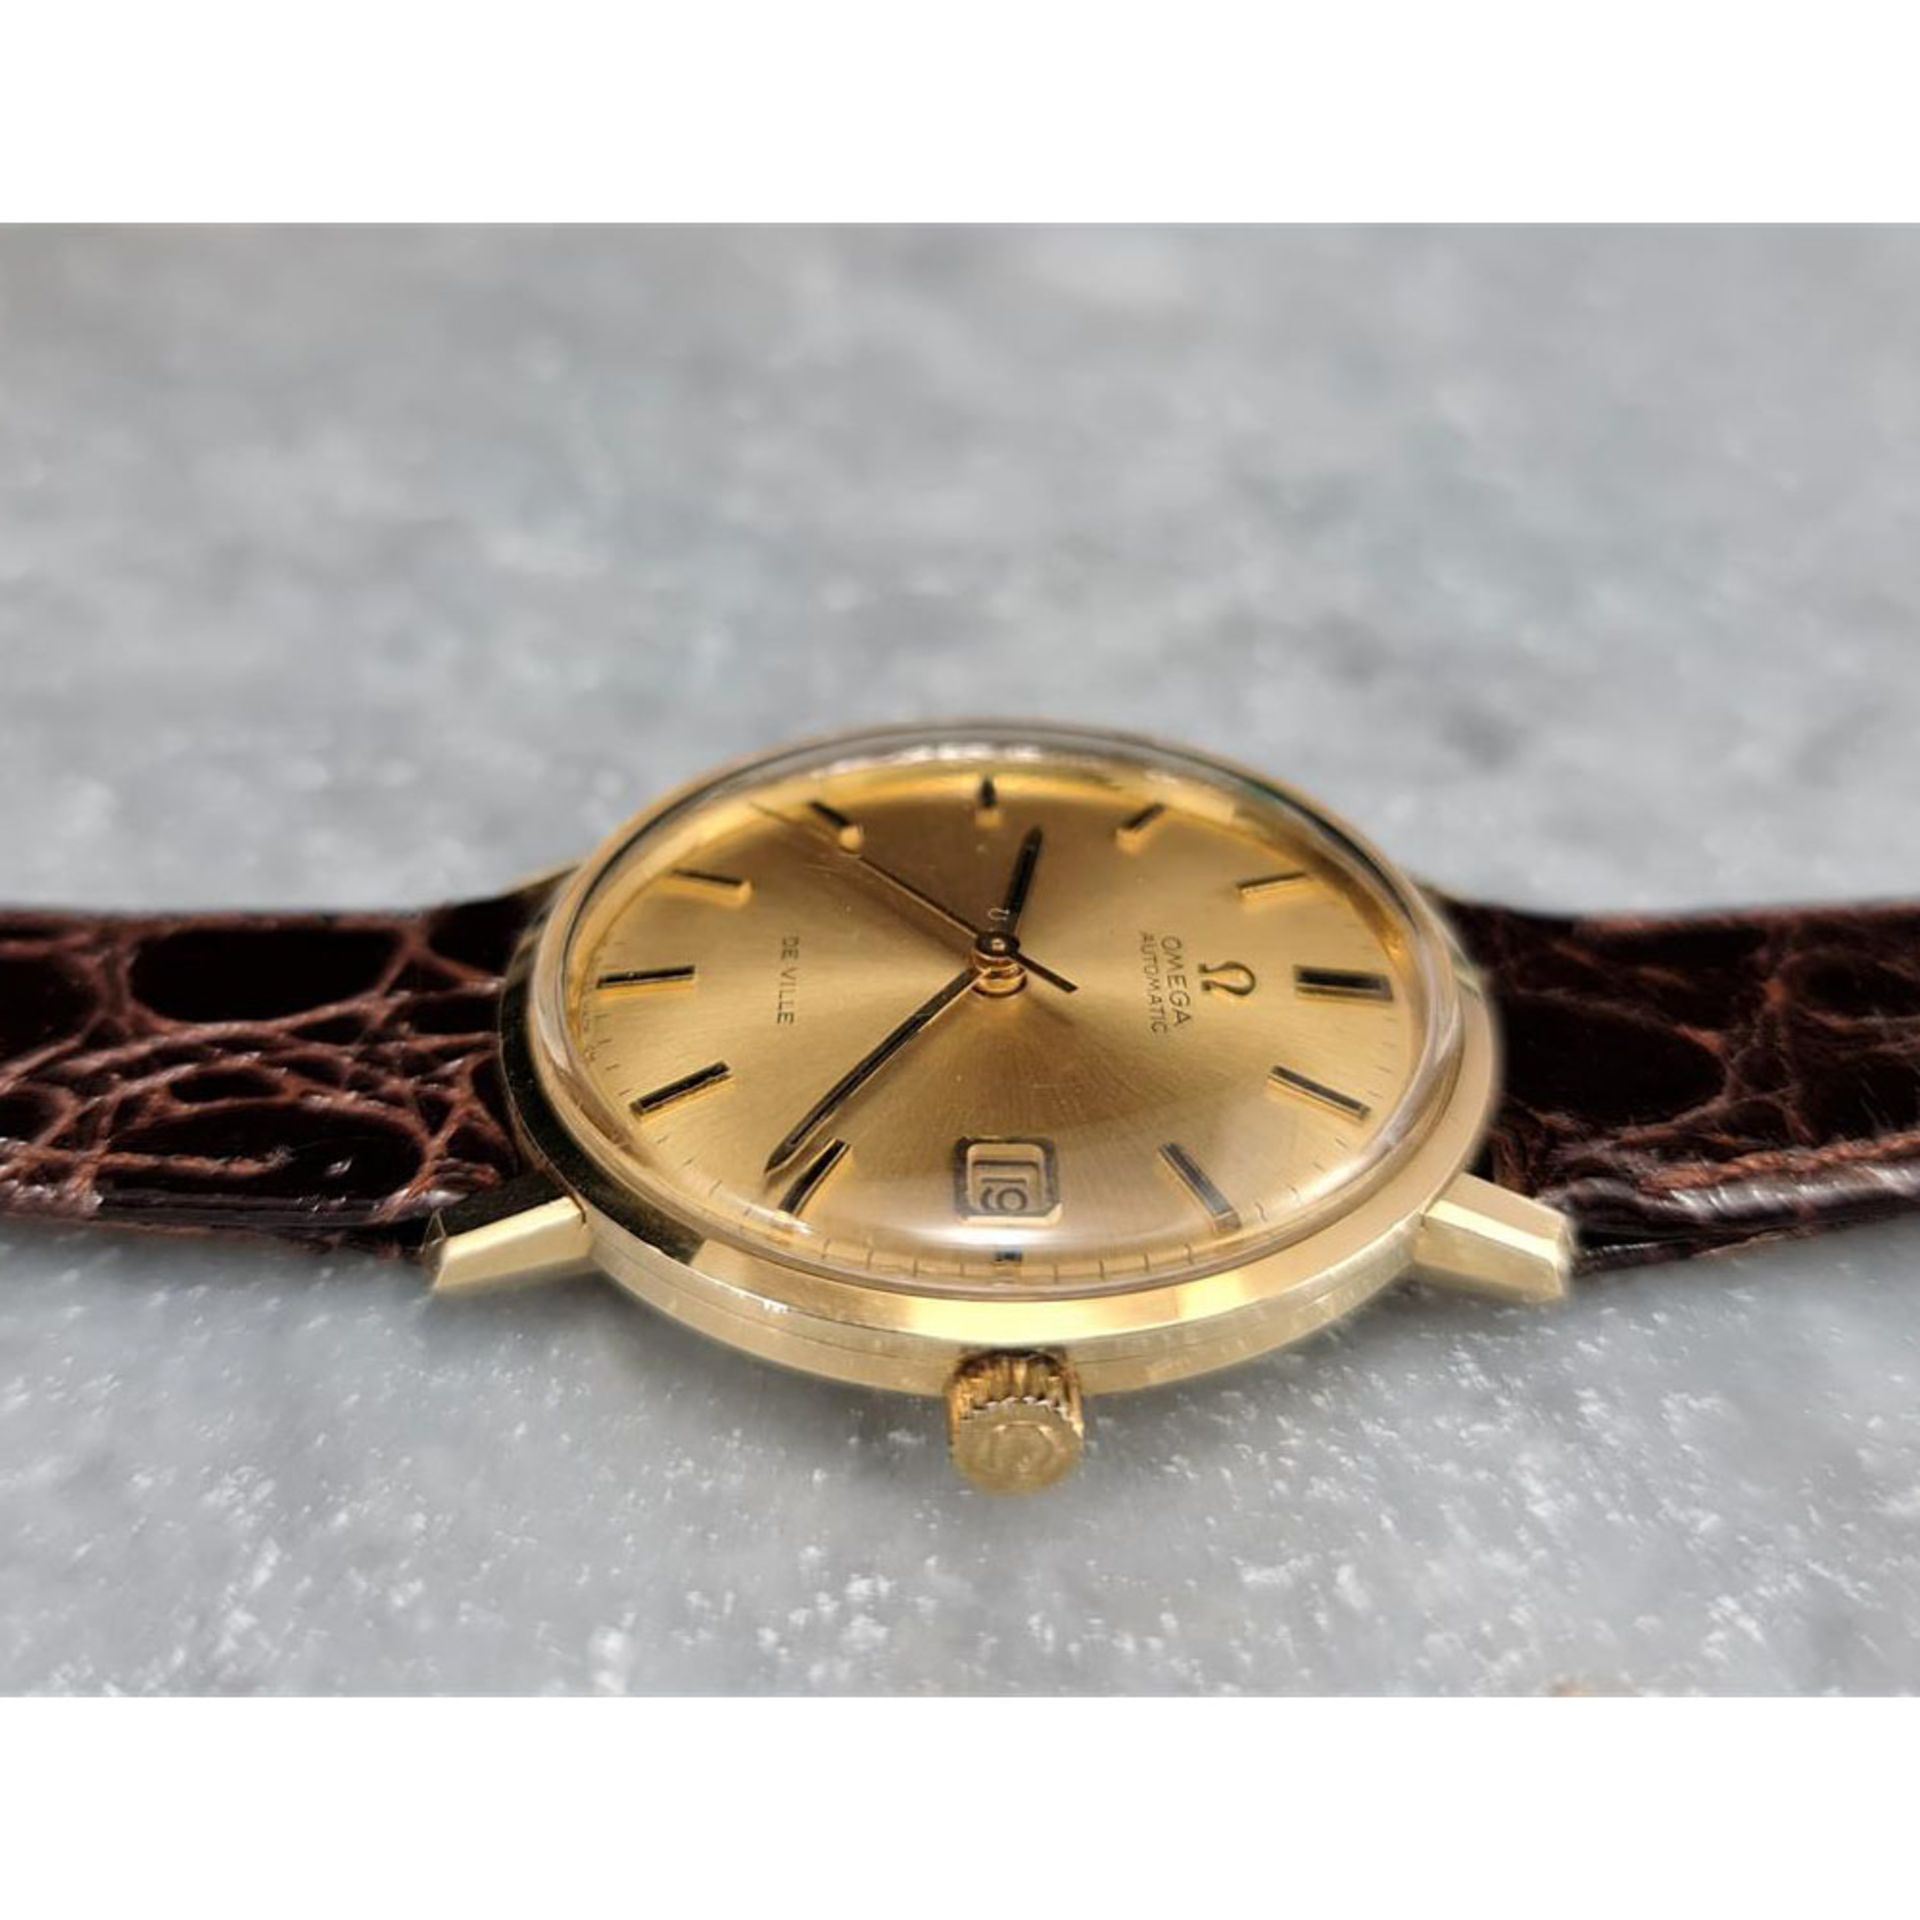 1970 Omega Seamaster De Ville Automatic Date - 14K Gold Watch - Image 4 of 8